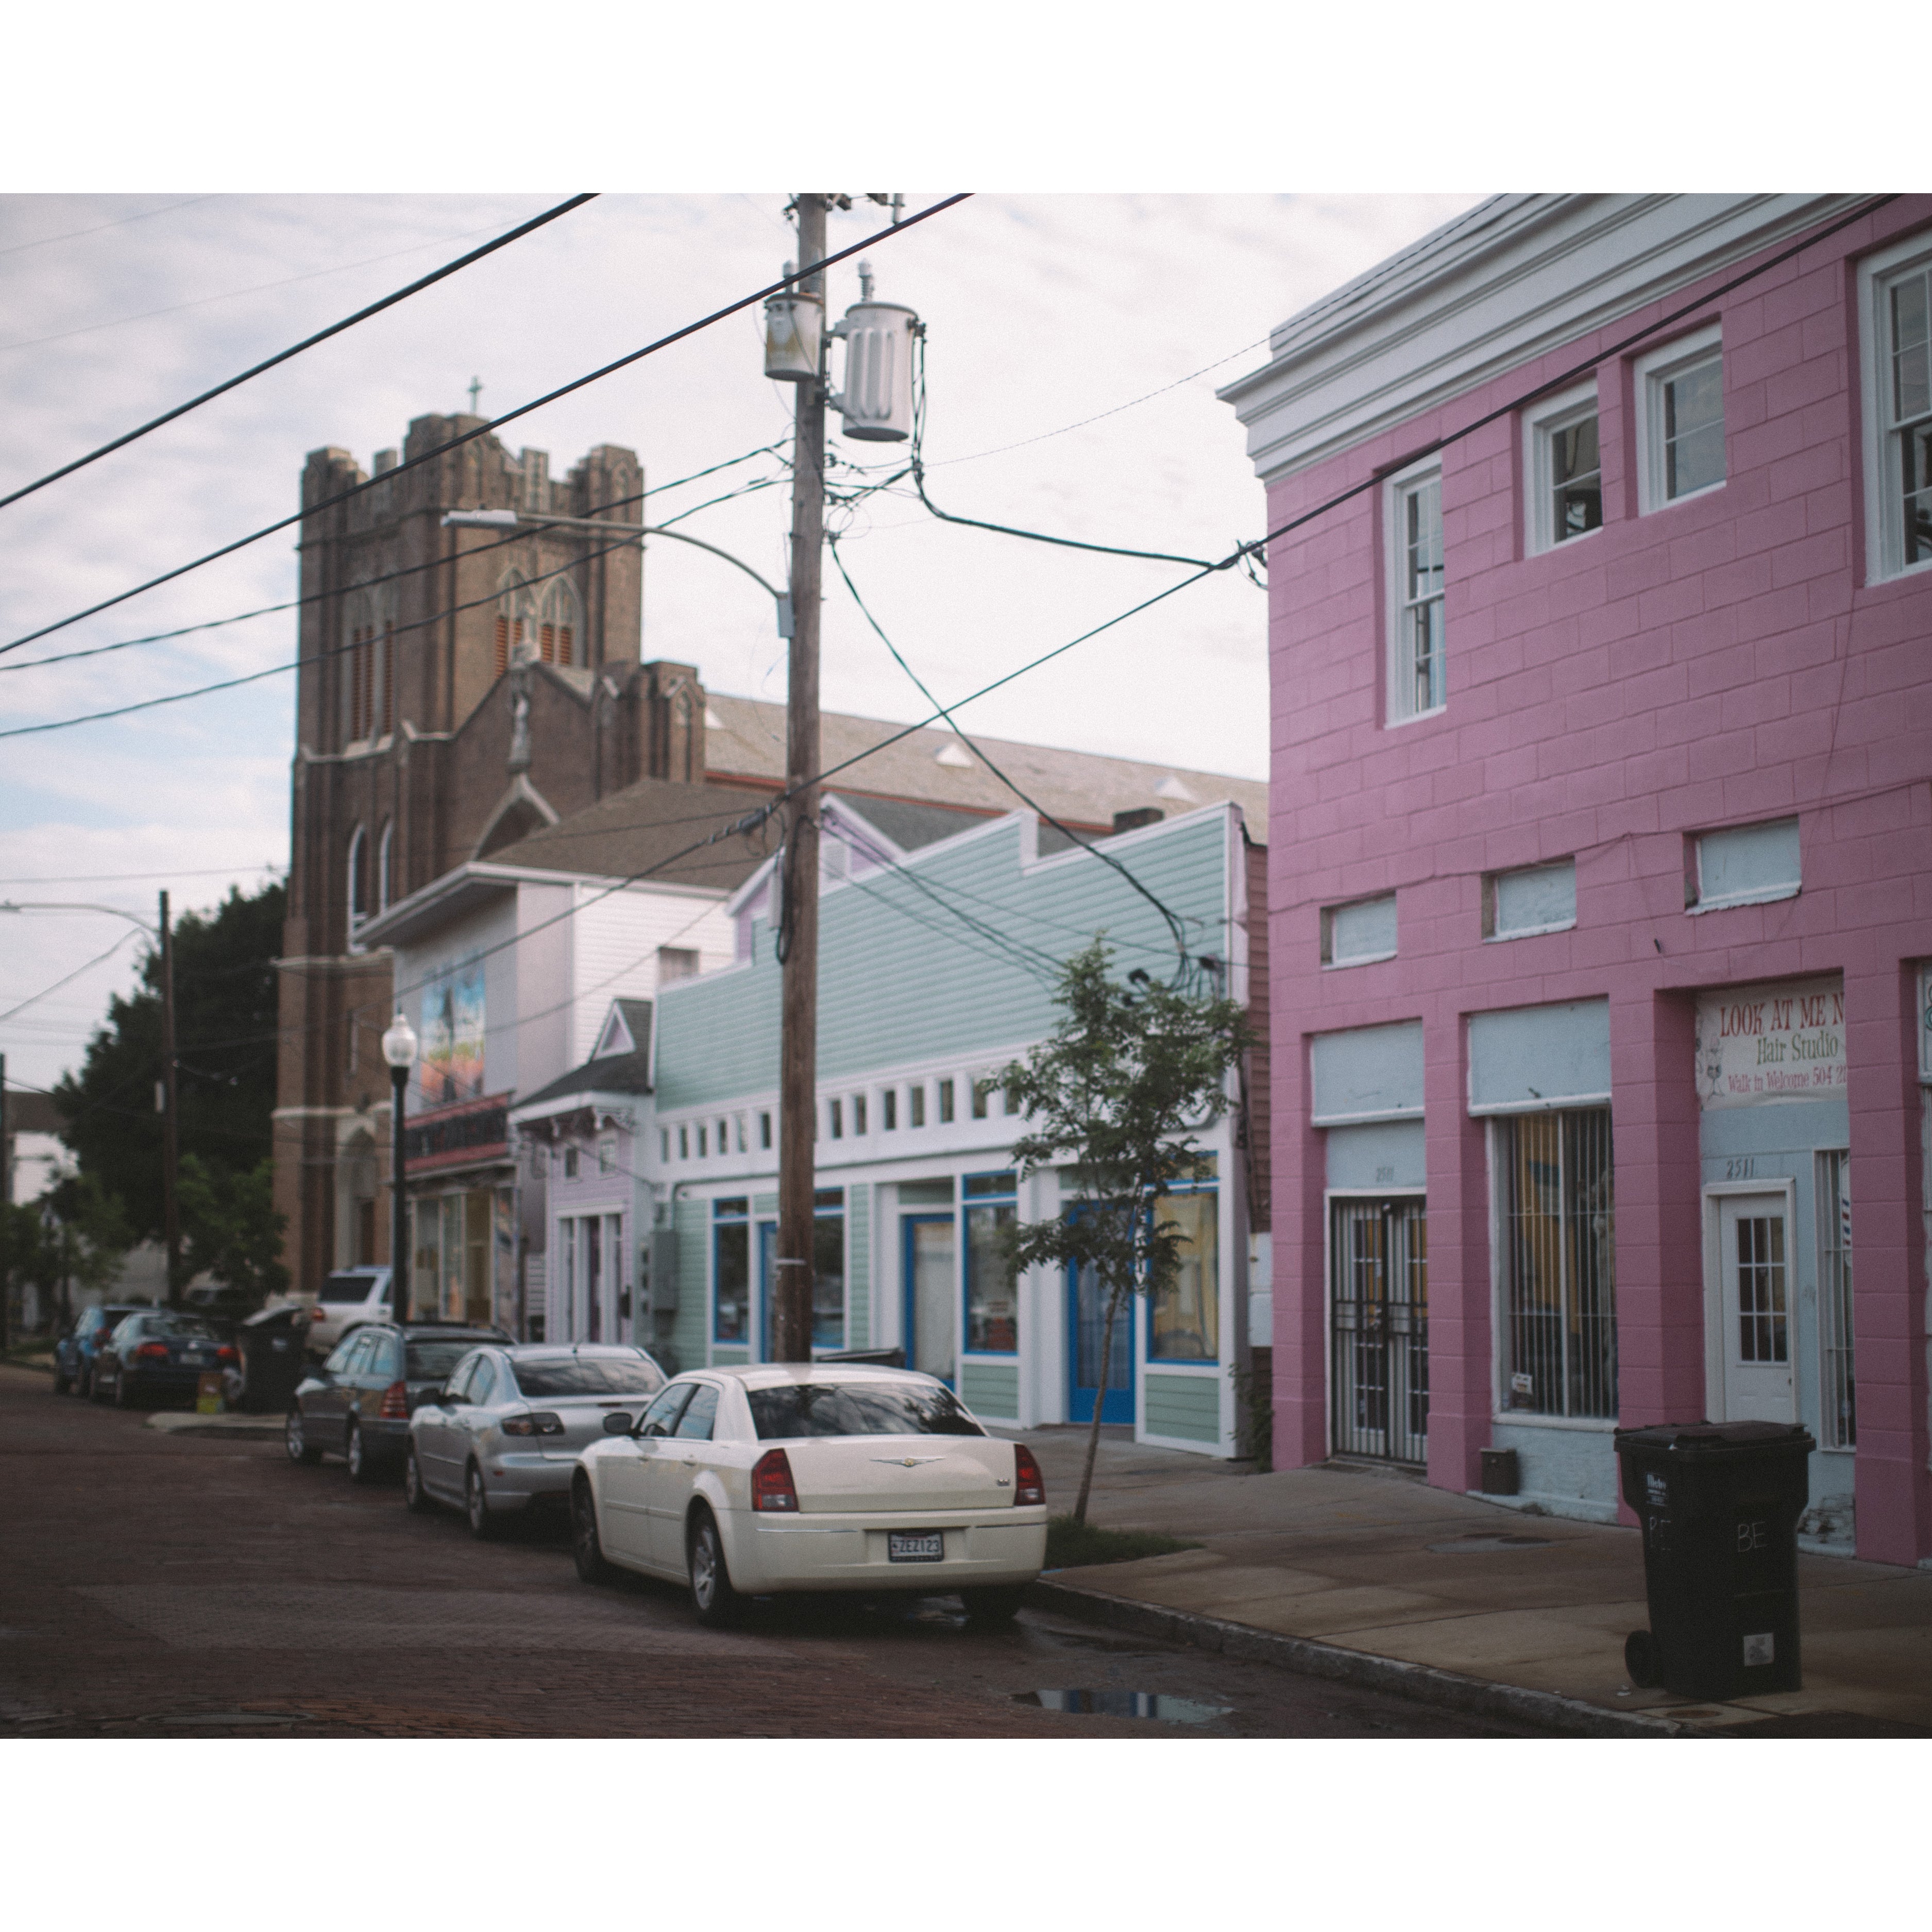 A New Orleans Travel Diary Through The Eyes of Photographer Patrick Melon
